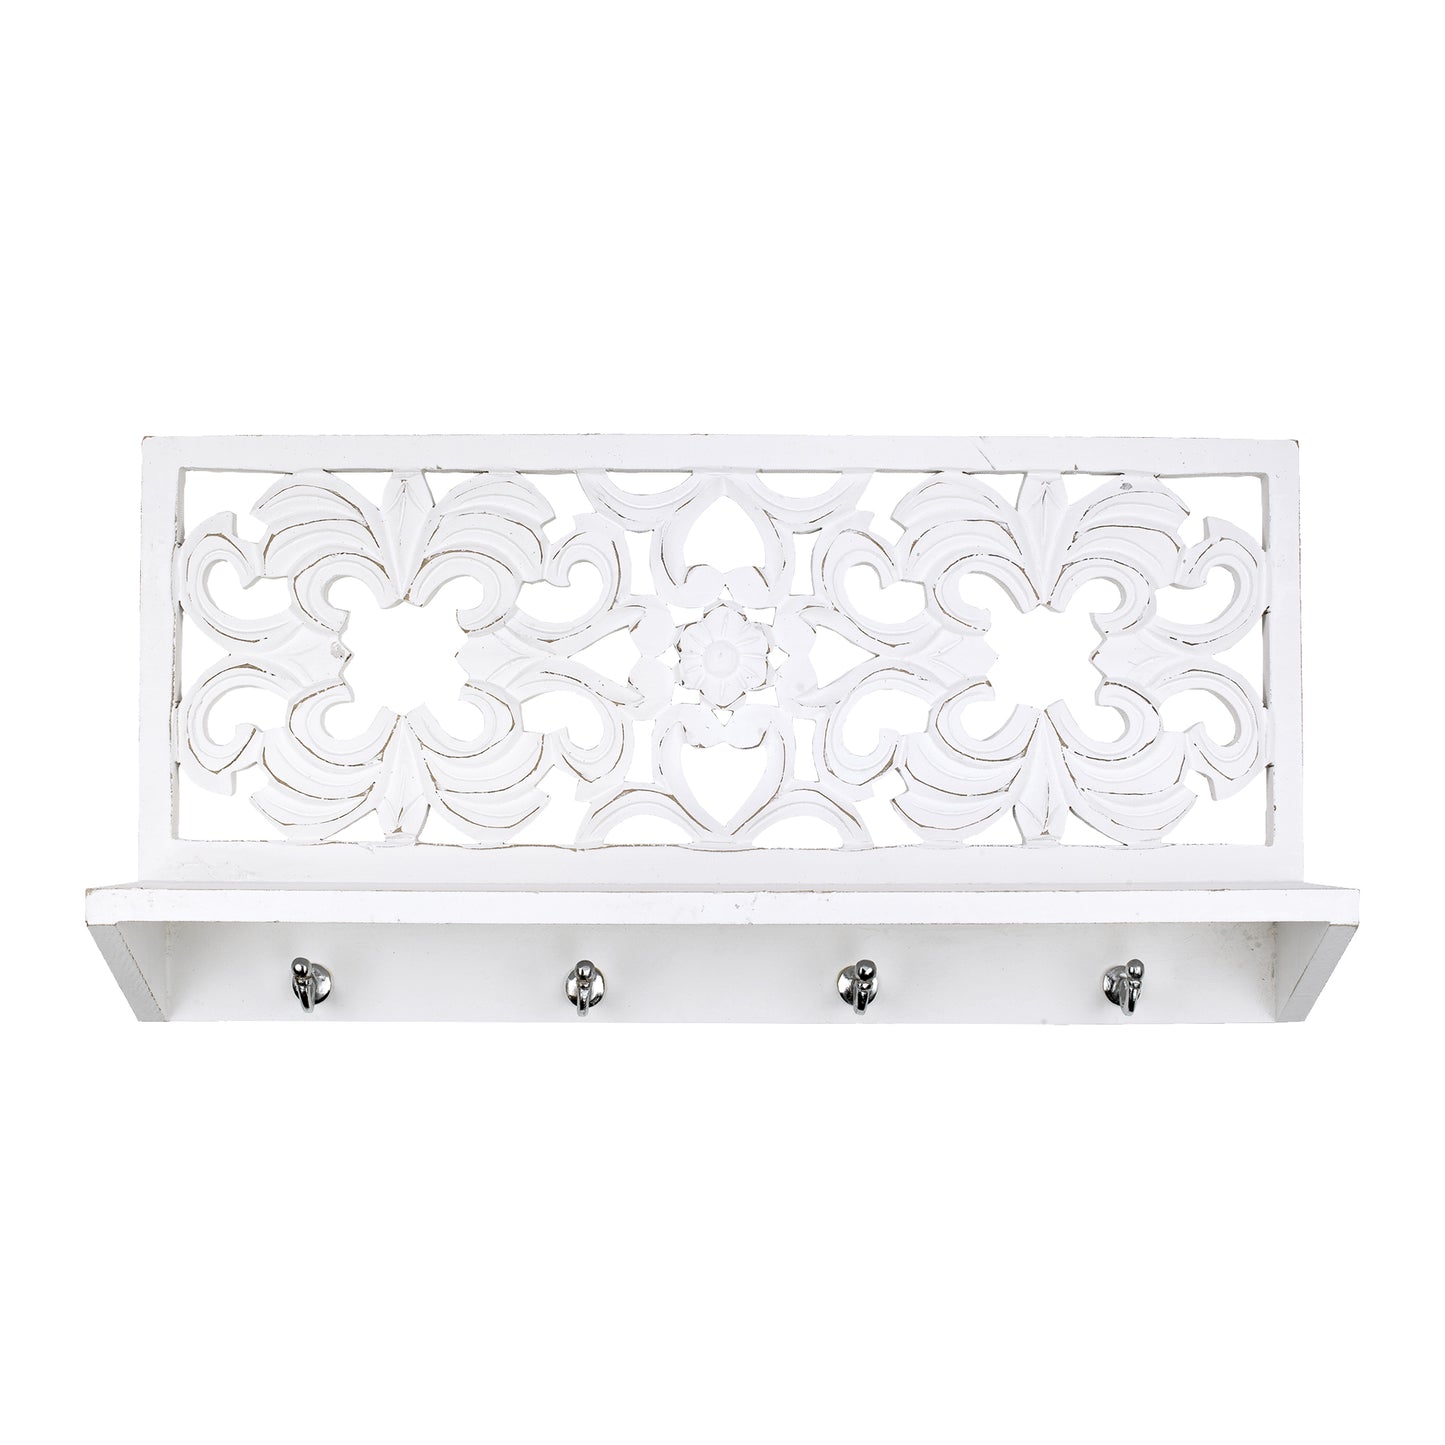 Hand-Carved Wall Shelf and Coat Rack - White (24")